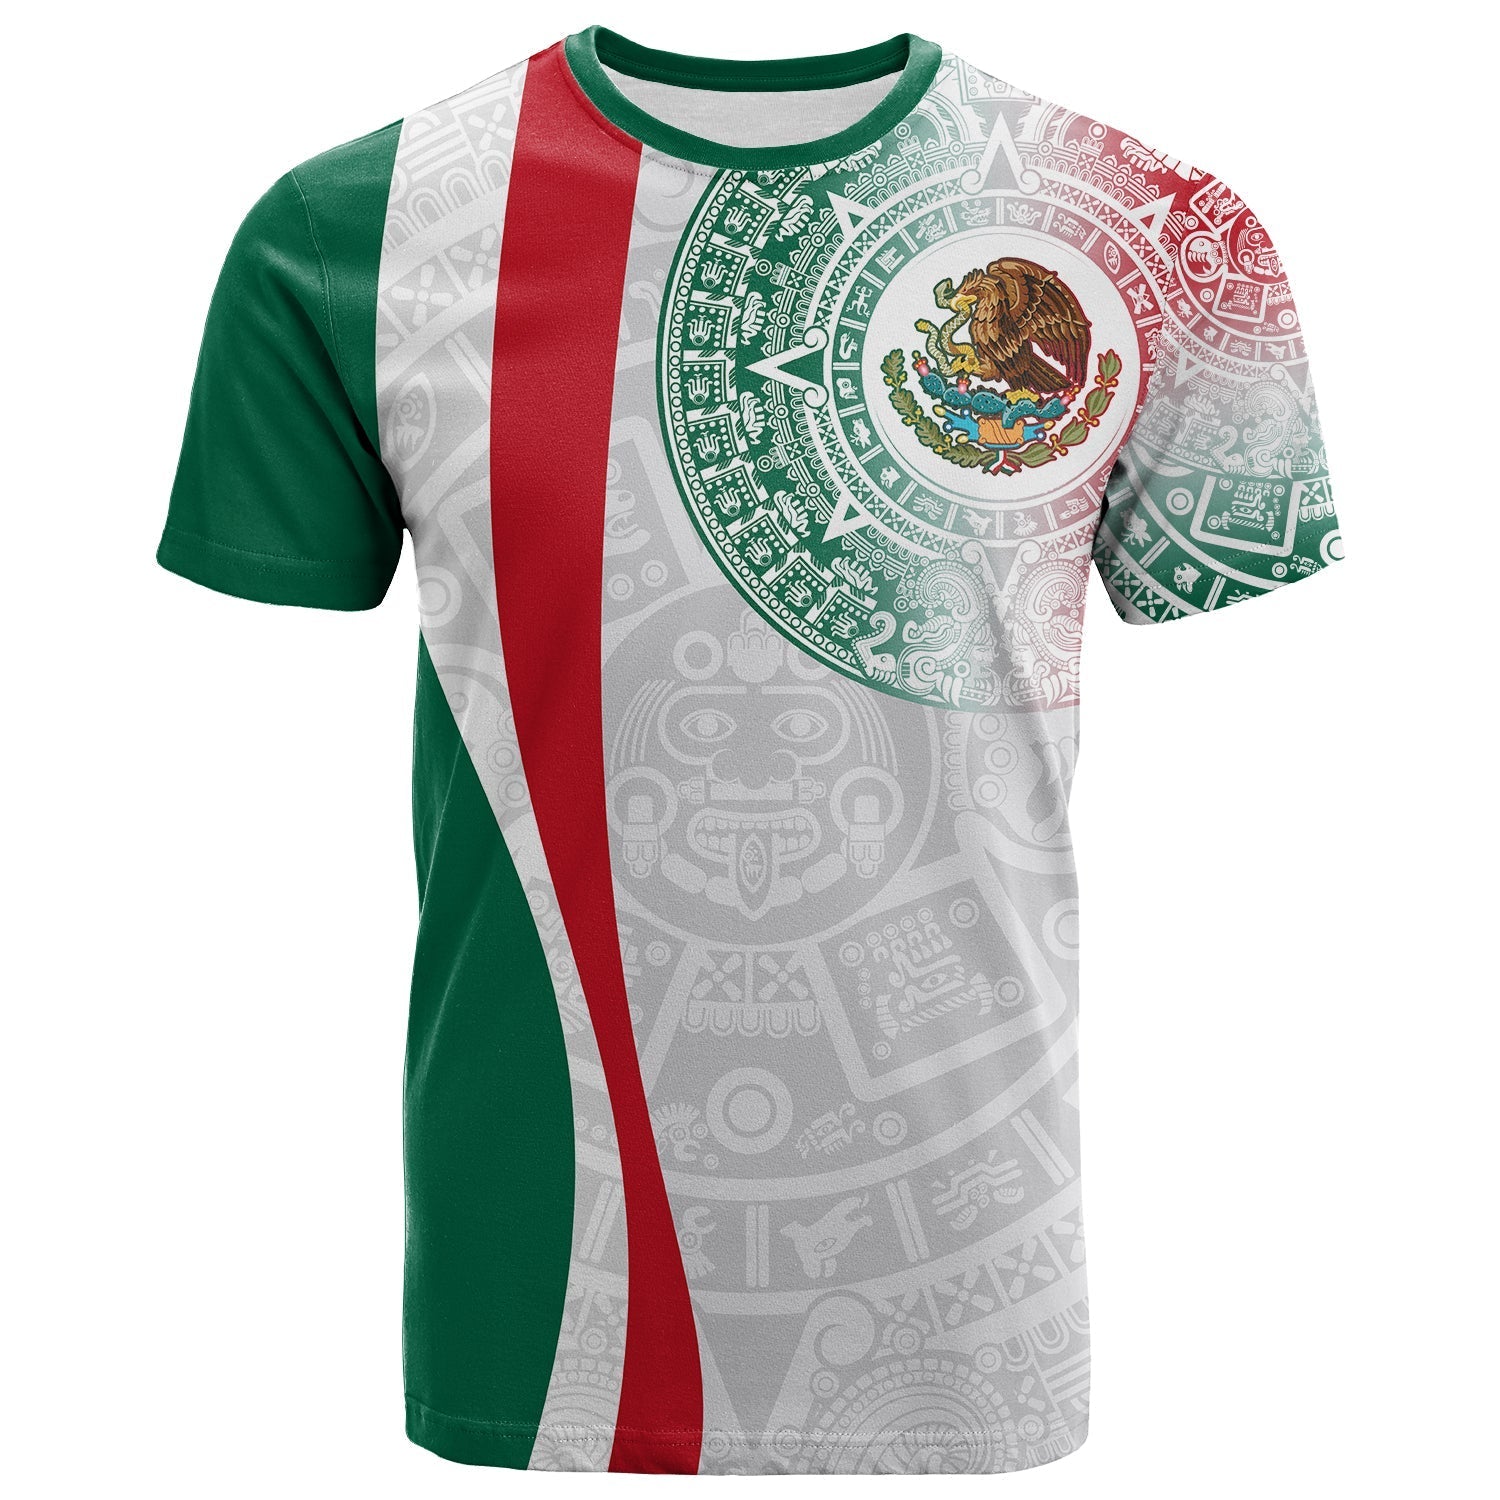 custom-personalised-mexico-t-shirt-mexican-eagles-aztec-pattern-lt13